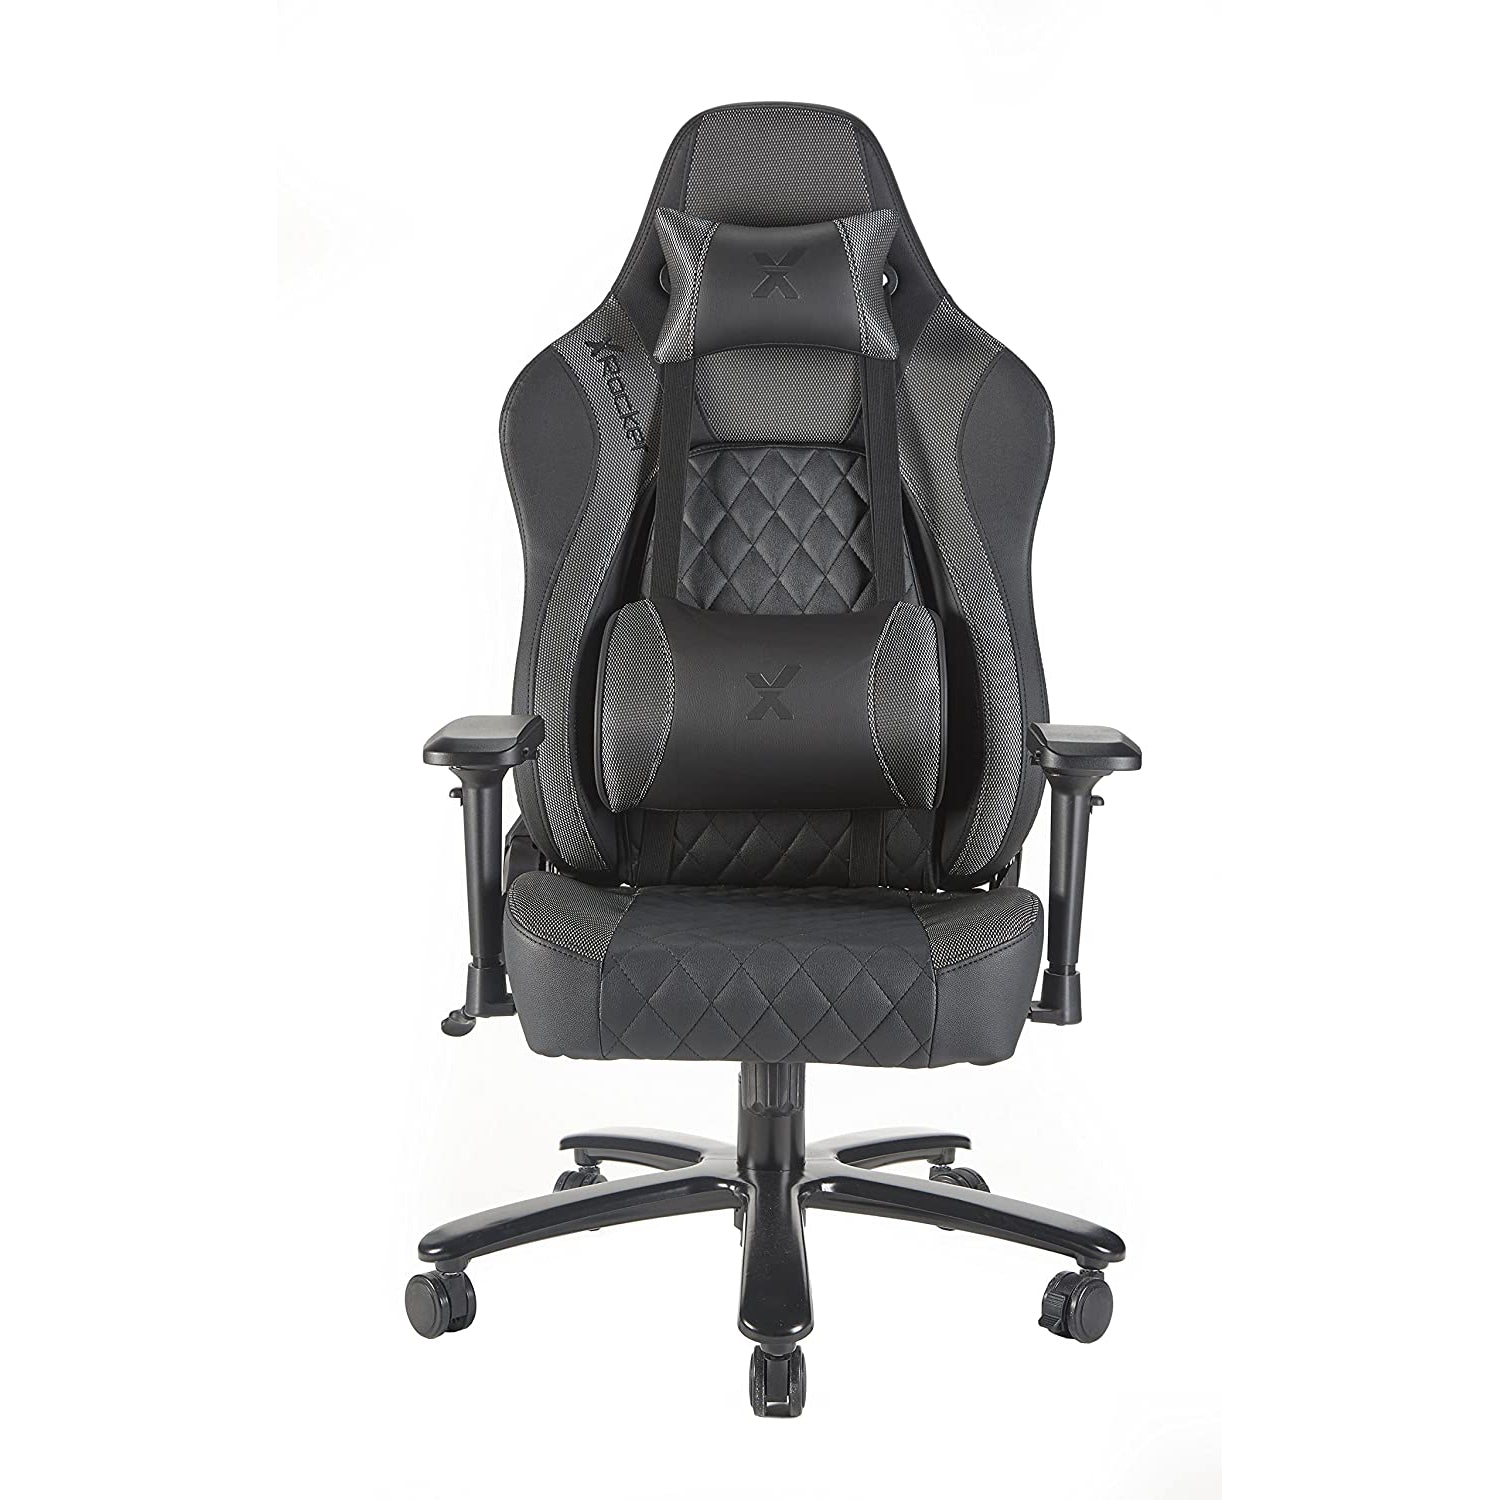 X Rocker Delta XL Pro Series IV Office Gaming Chair Heavy Duty Adjustable with Lockable Wheels (Silver Lined)